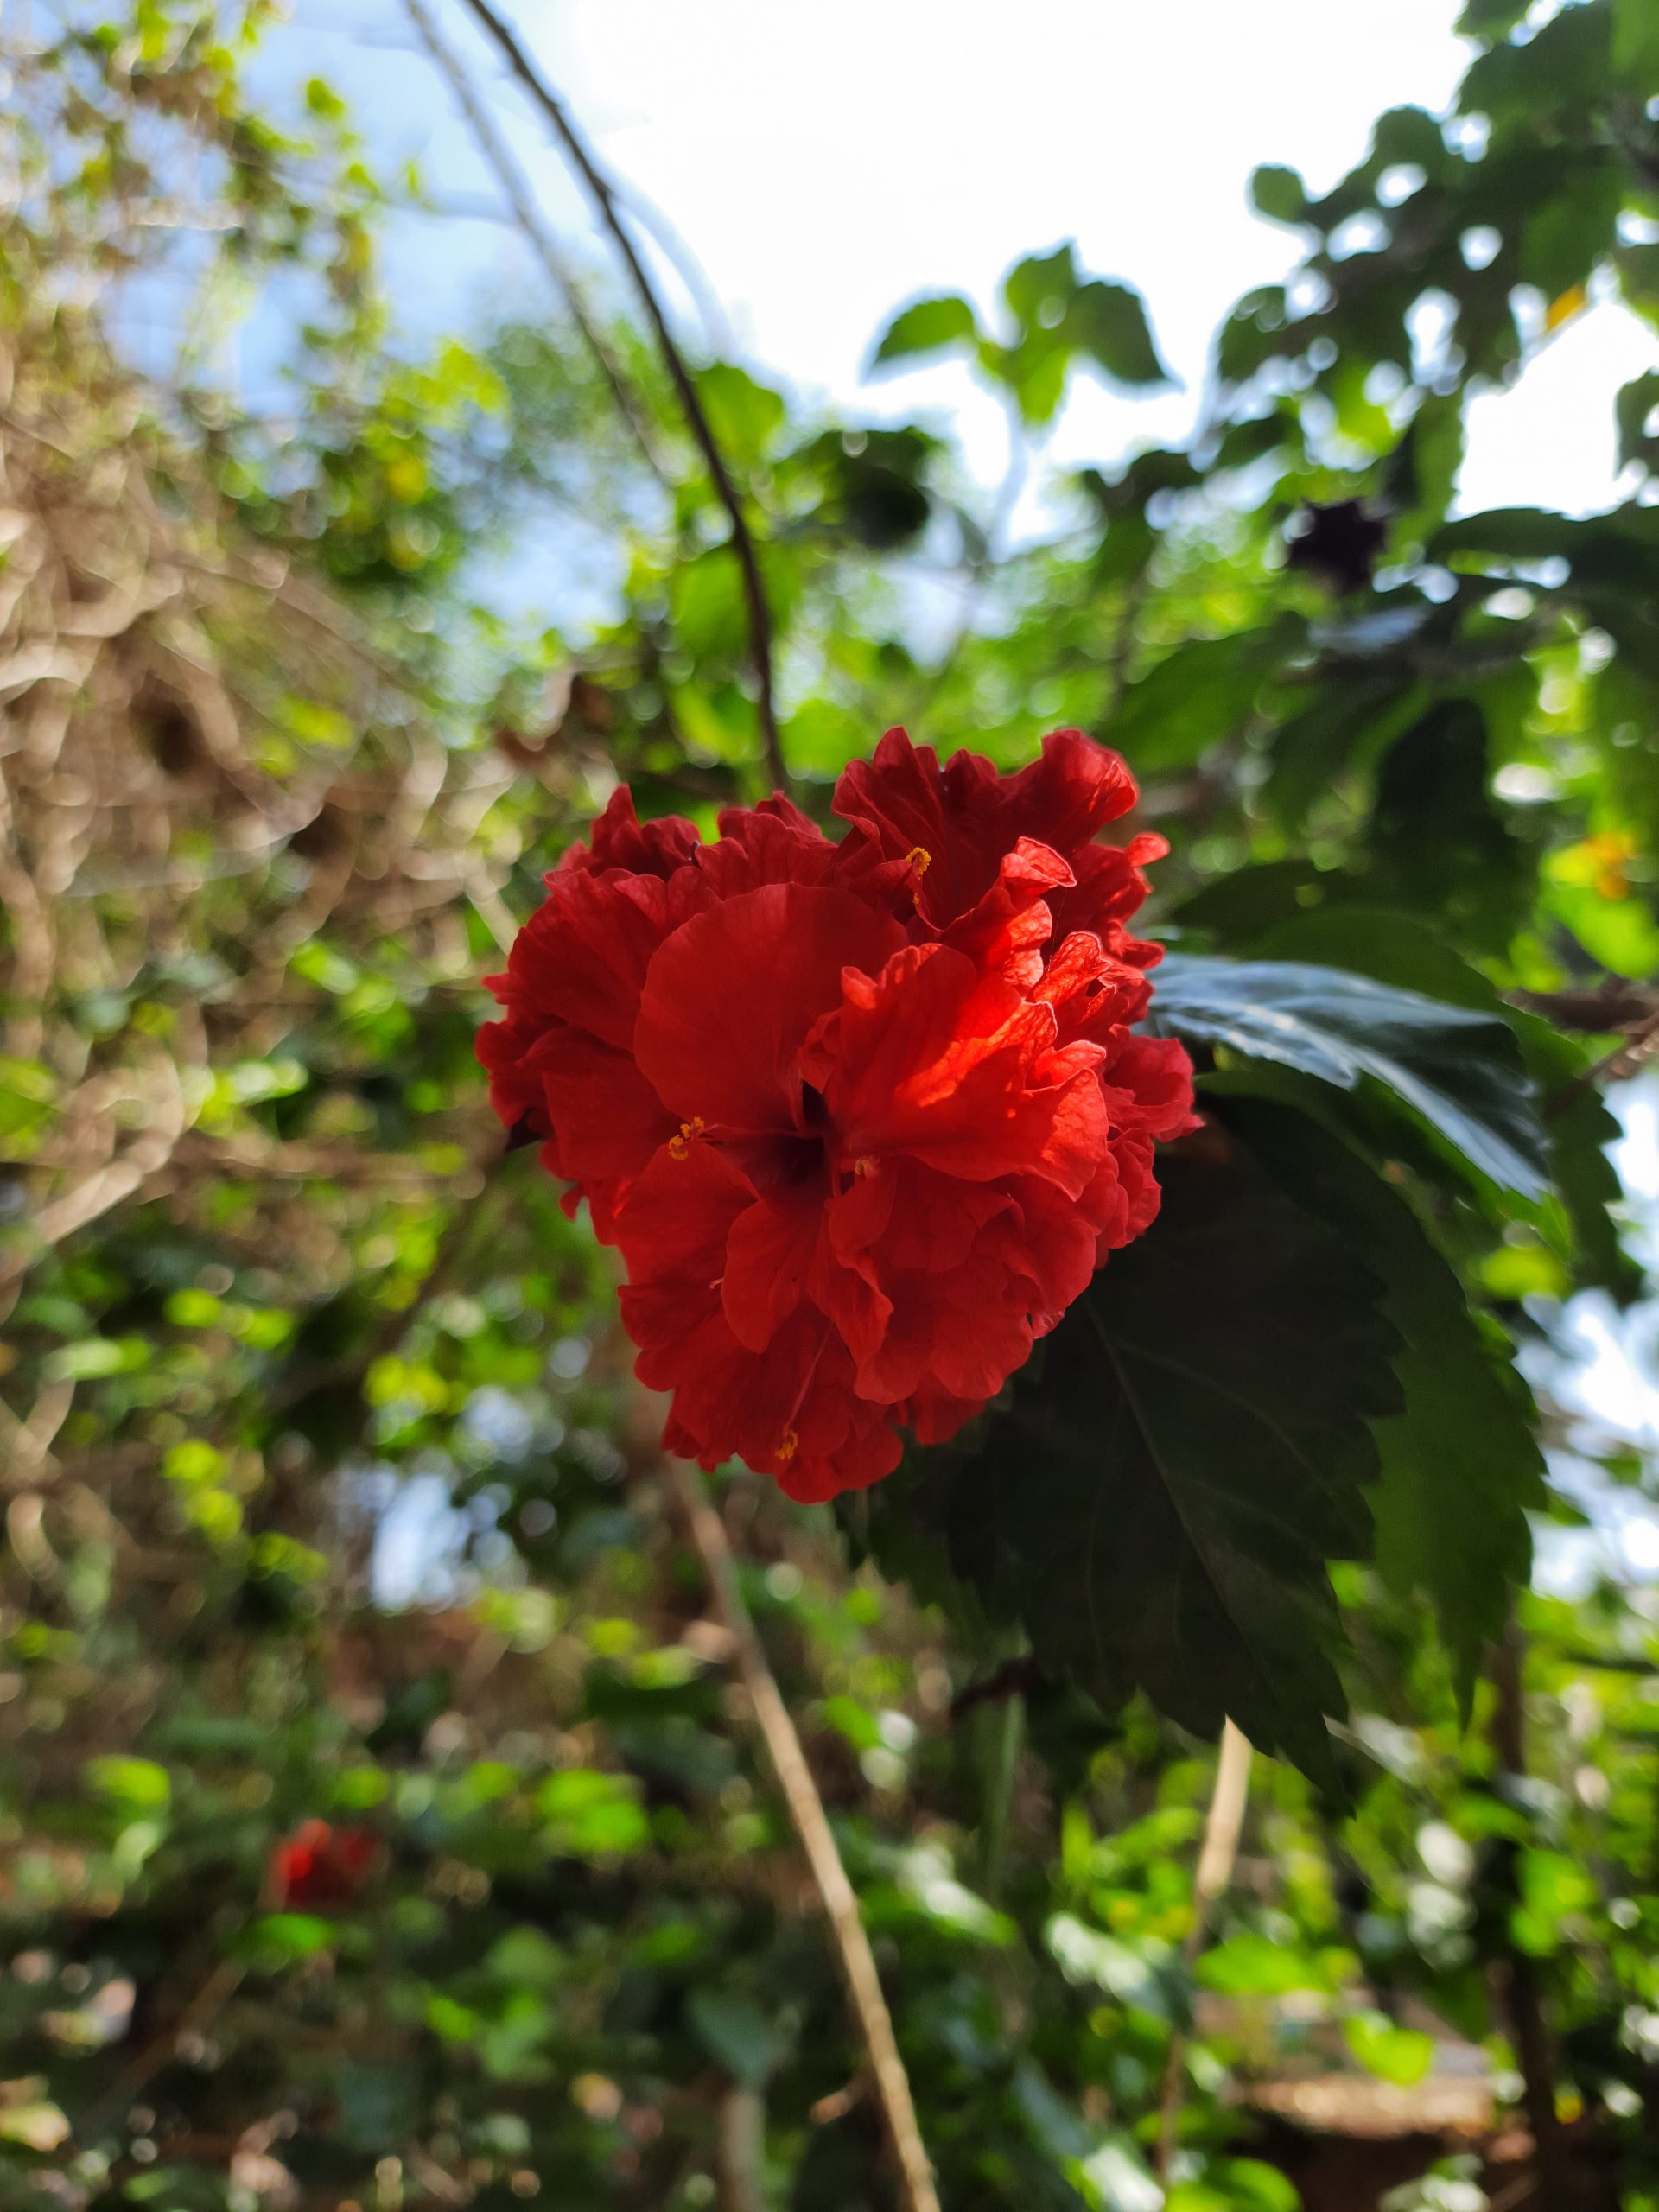 A Hibiscus flower